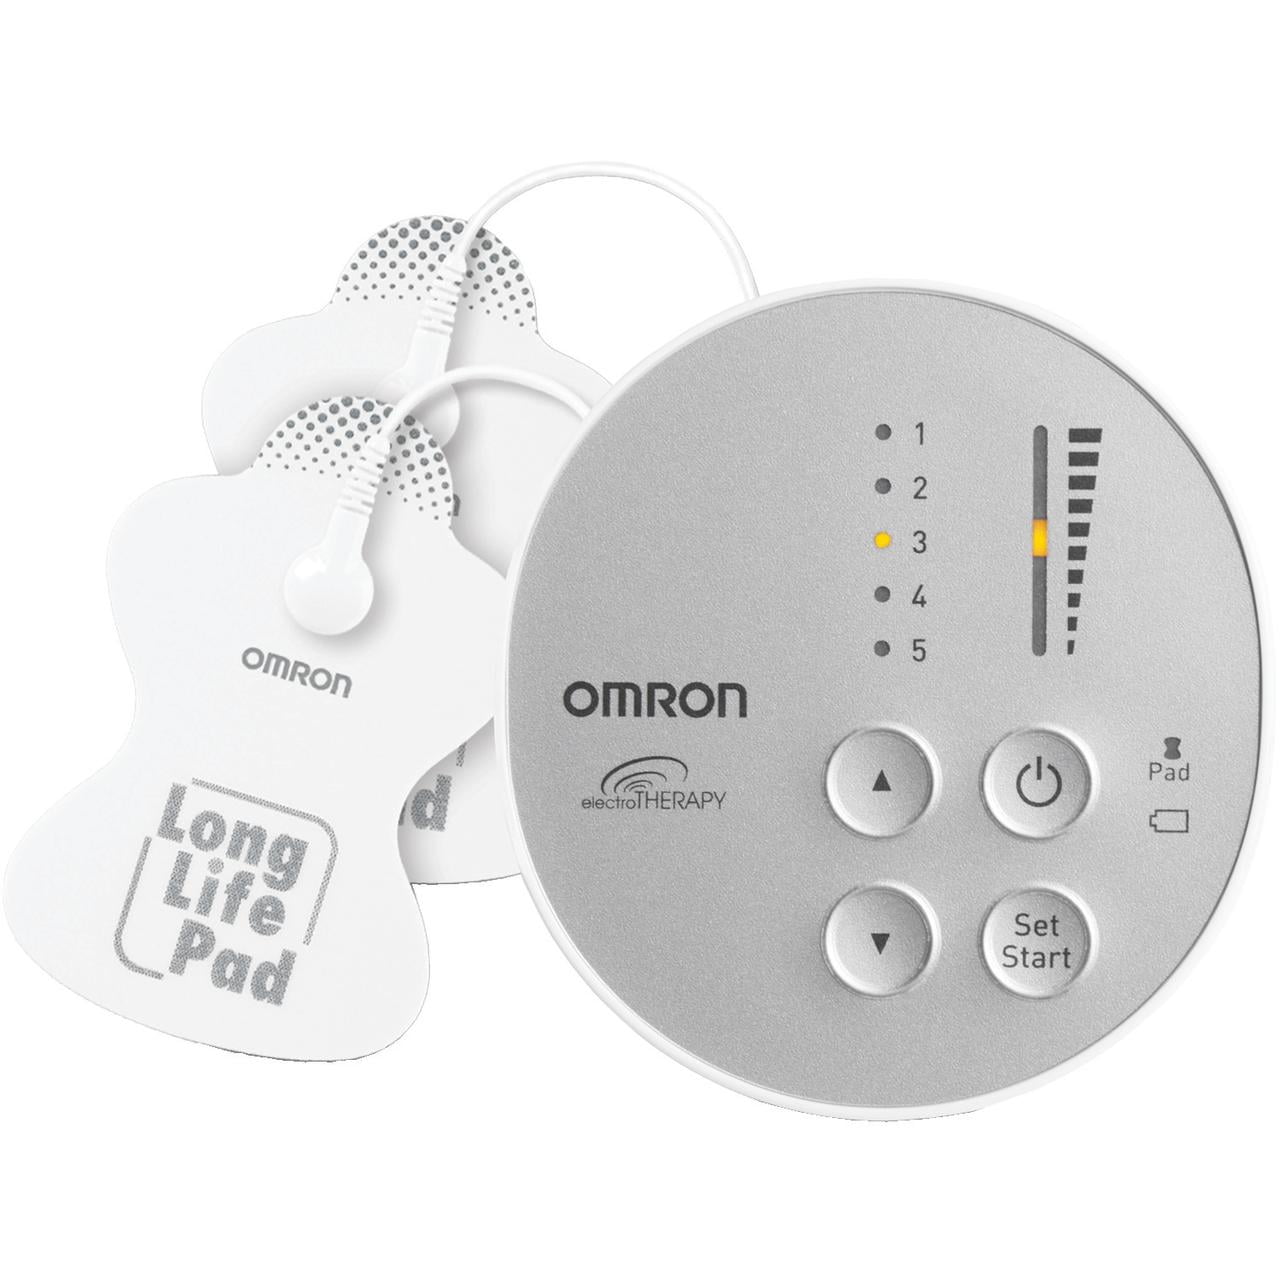 Buy Omron Tens Replacement Electrode Long Life Pads 1 pair (2pcs) Online at  Chemist Warehouse®